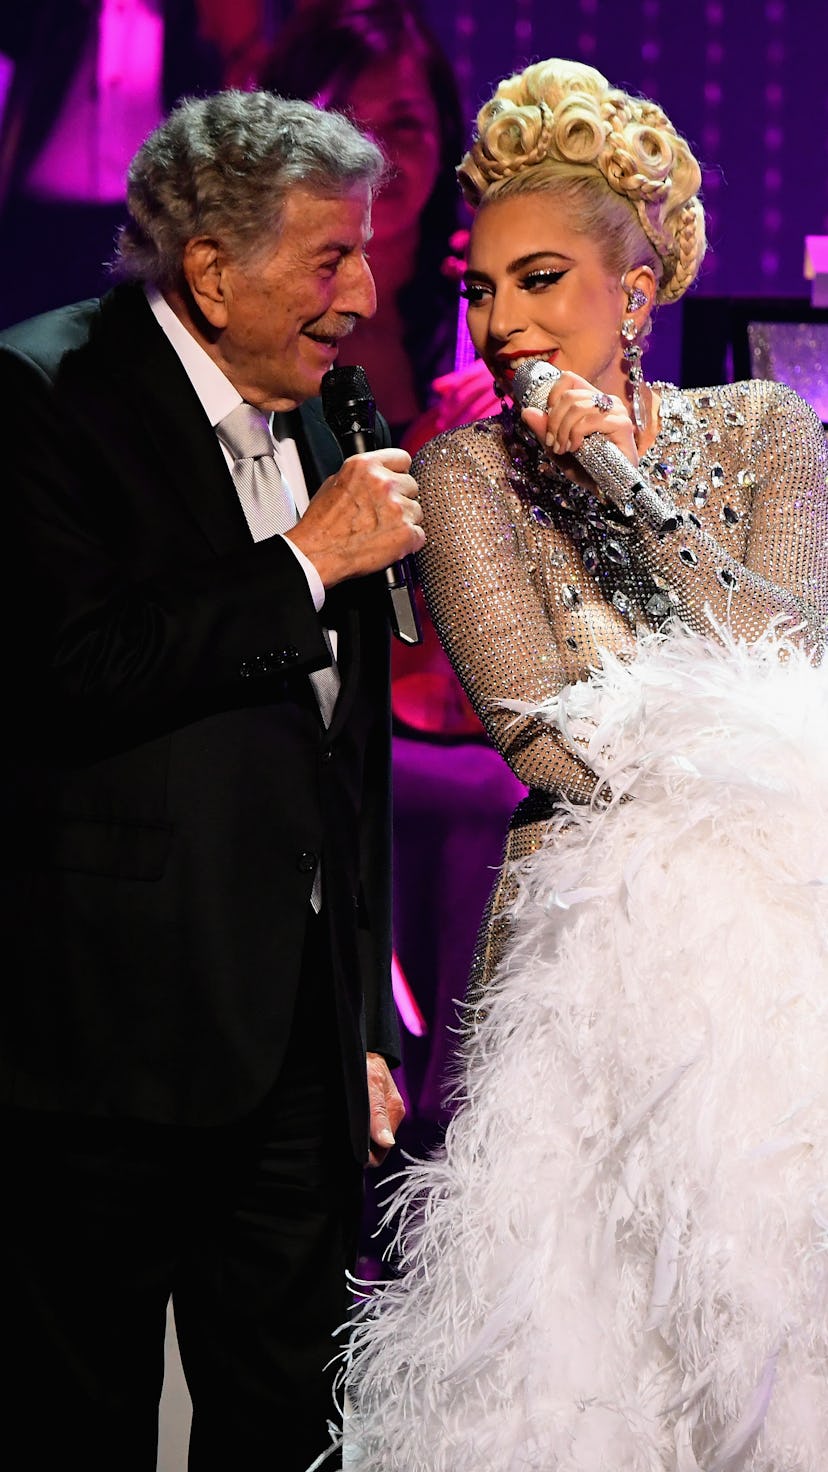 Lady Gaga performs with Tony Bennett during her 'JAZZ & PIANO' residency at Park Theater.